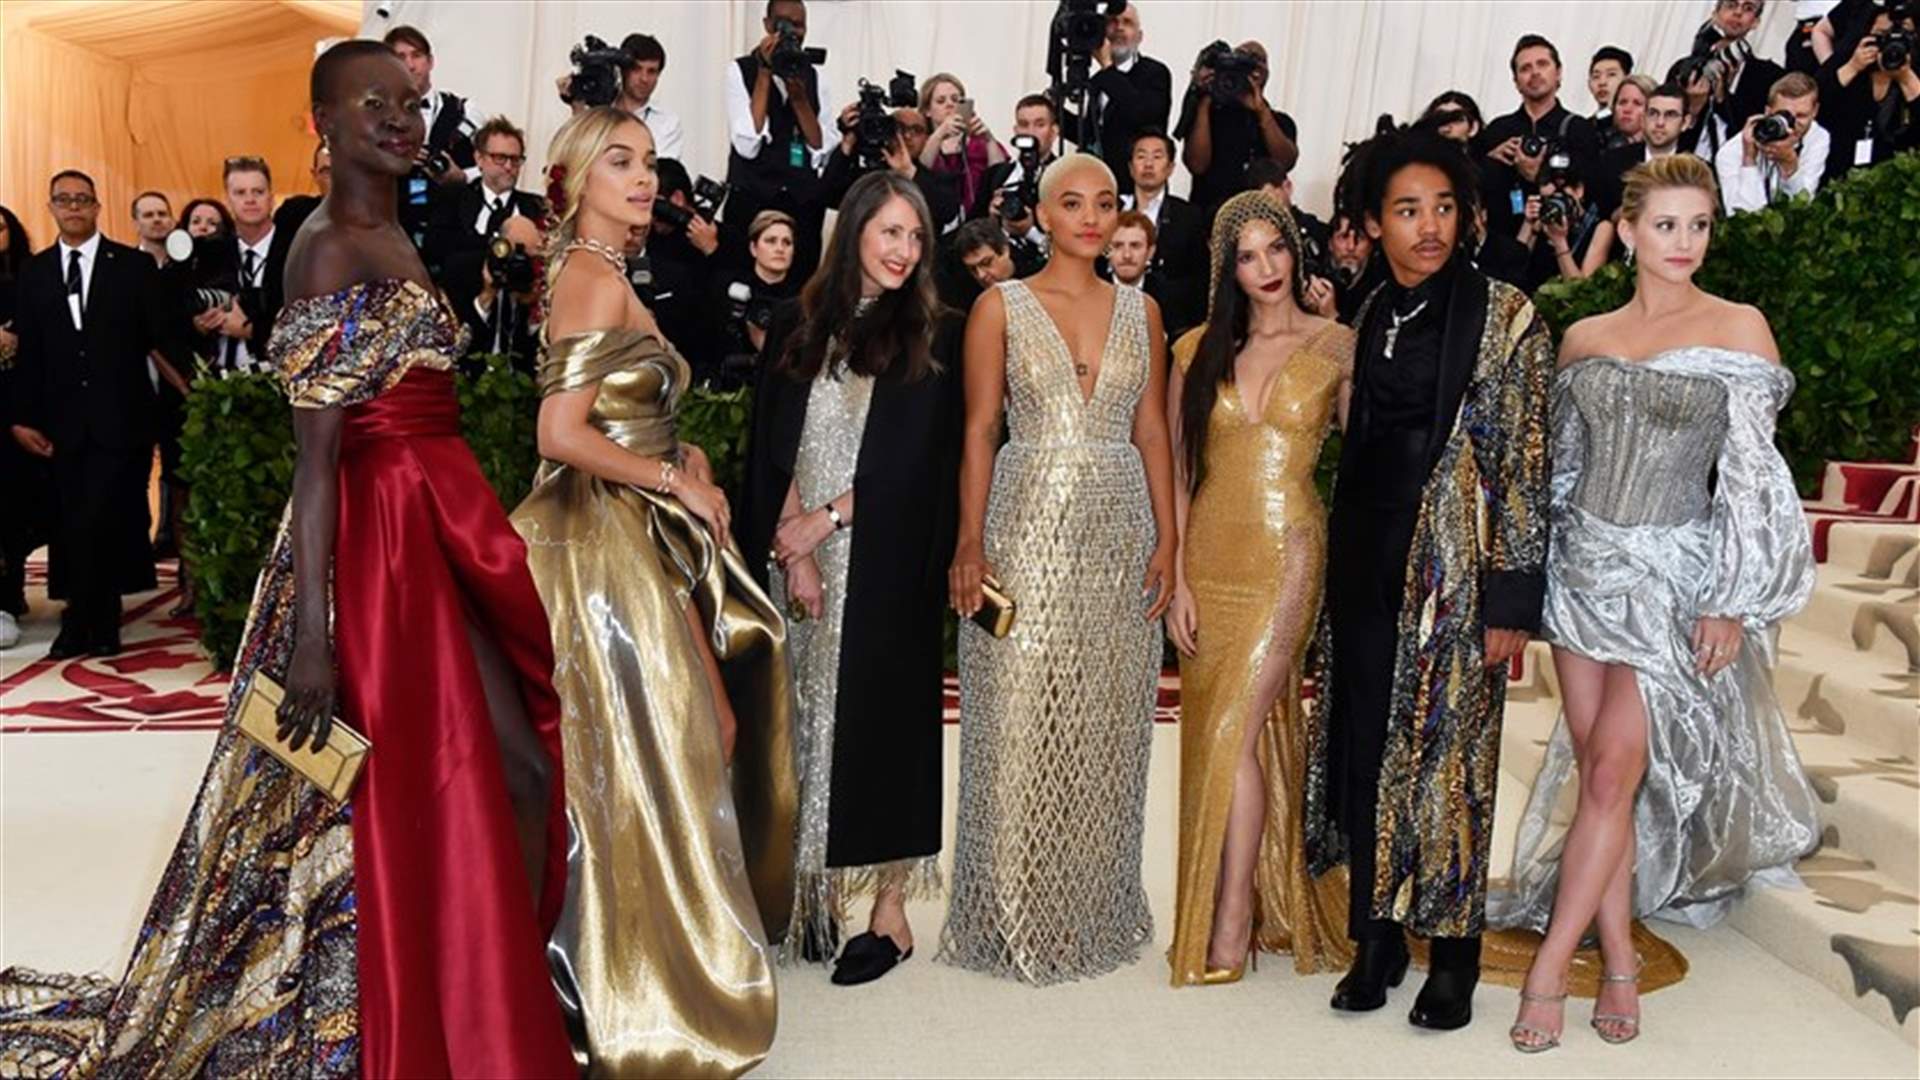 Met Gala 2018: Most Captivating Looks From Fashion’s Biggest Night